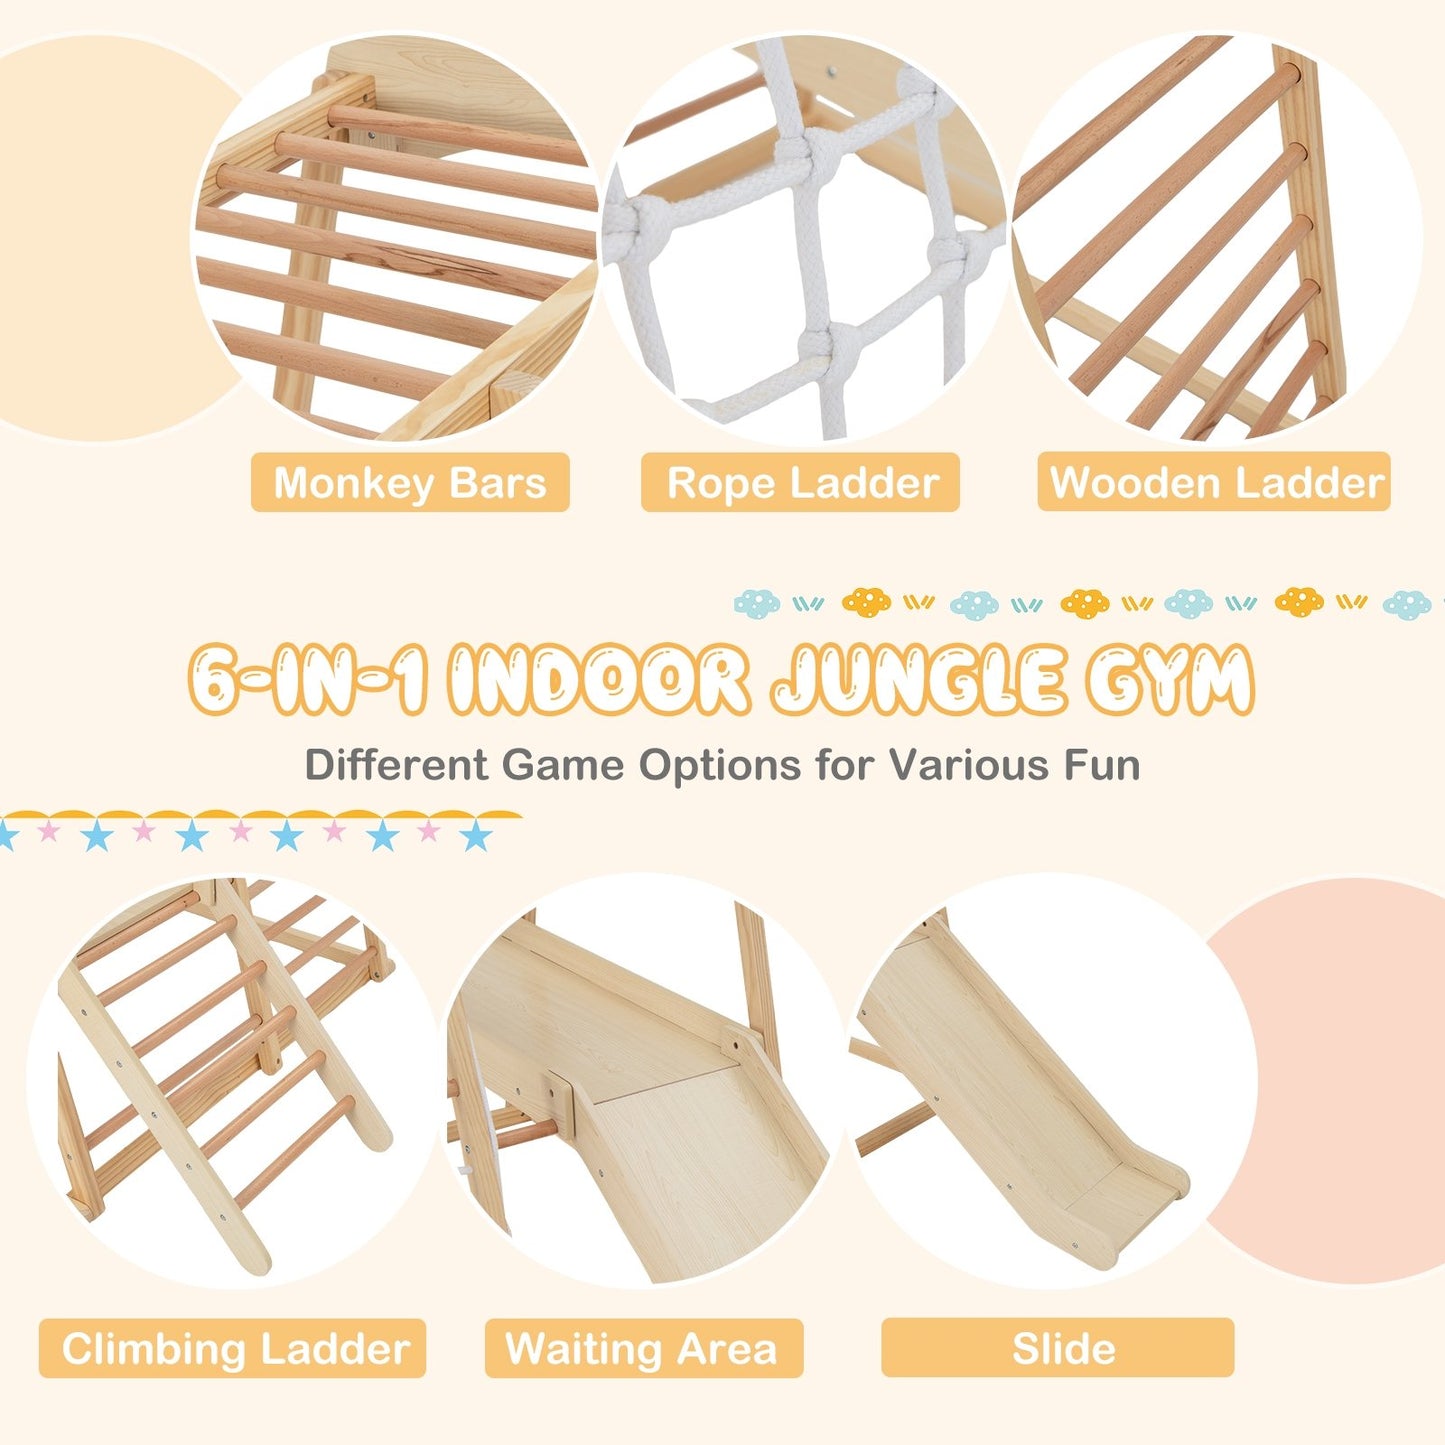 6-in-1 Indoor Jungle Gym Kids Wooden Playground with Monkey Bars, Natural